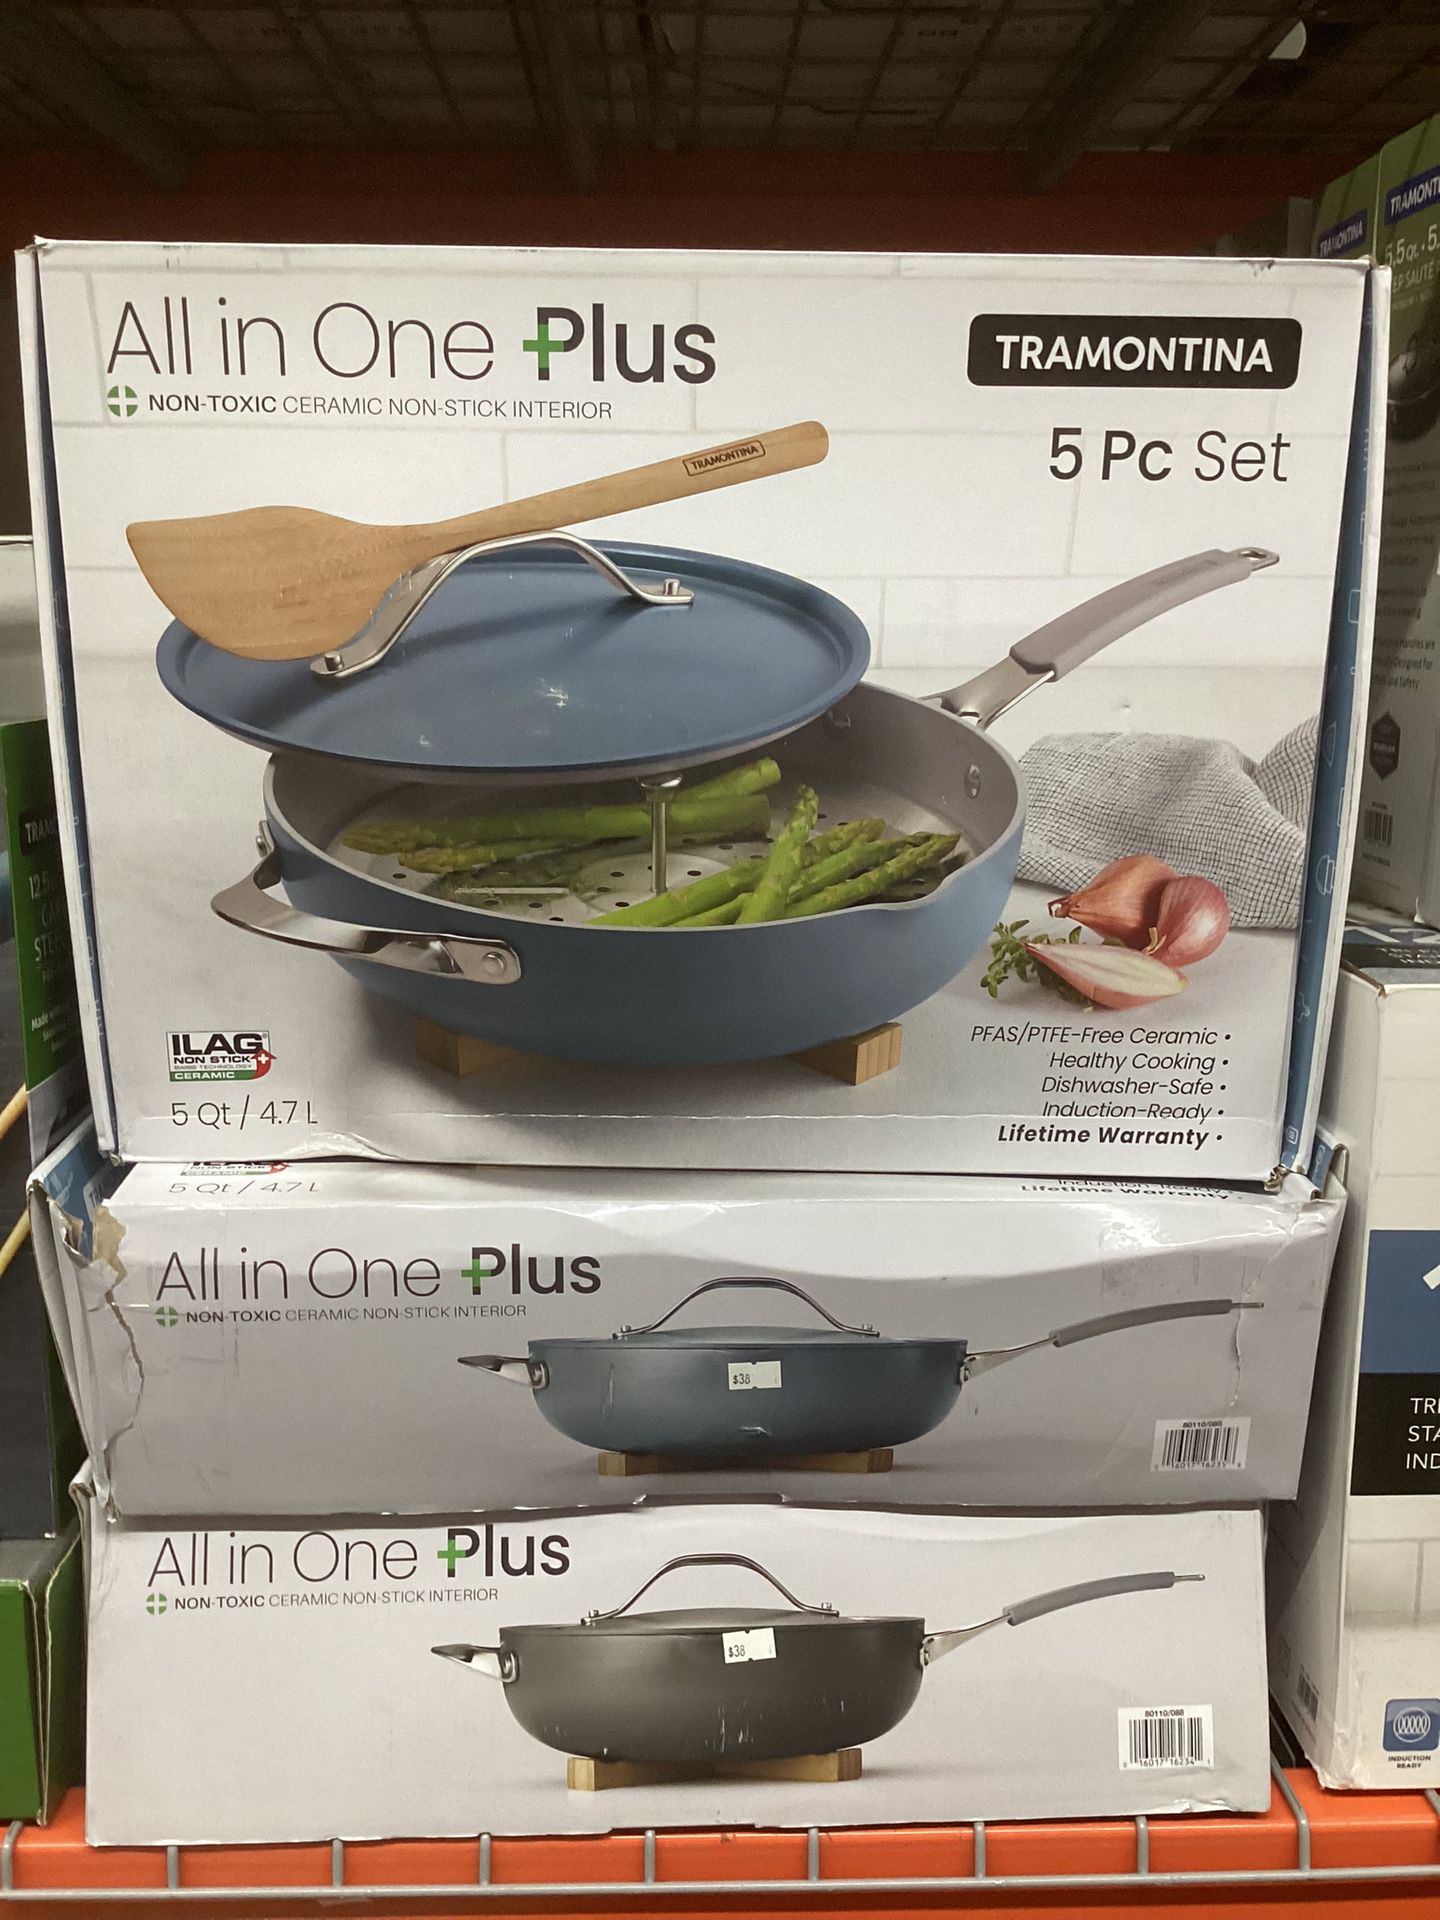 Tramontina 5-Qt. All-in-One Plus Pan in Blueberry